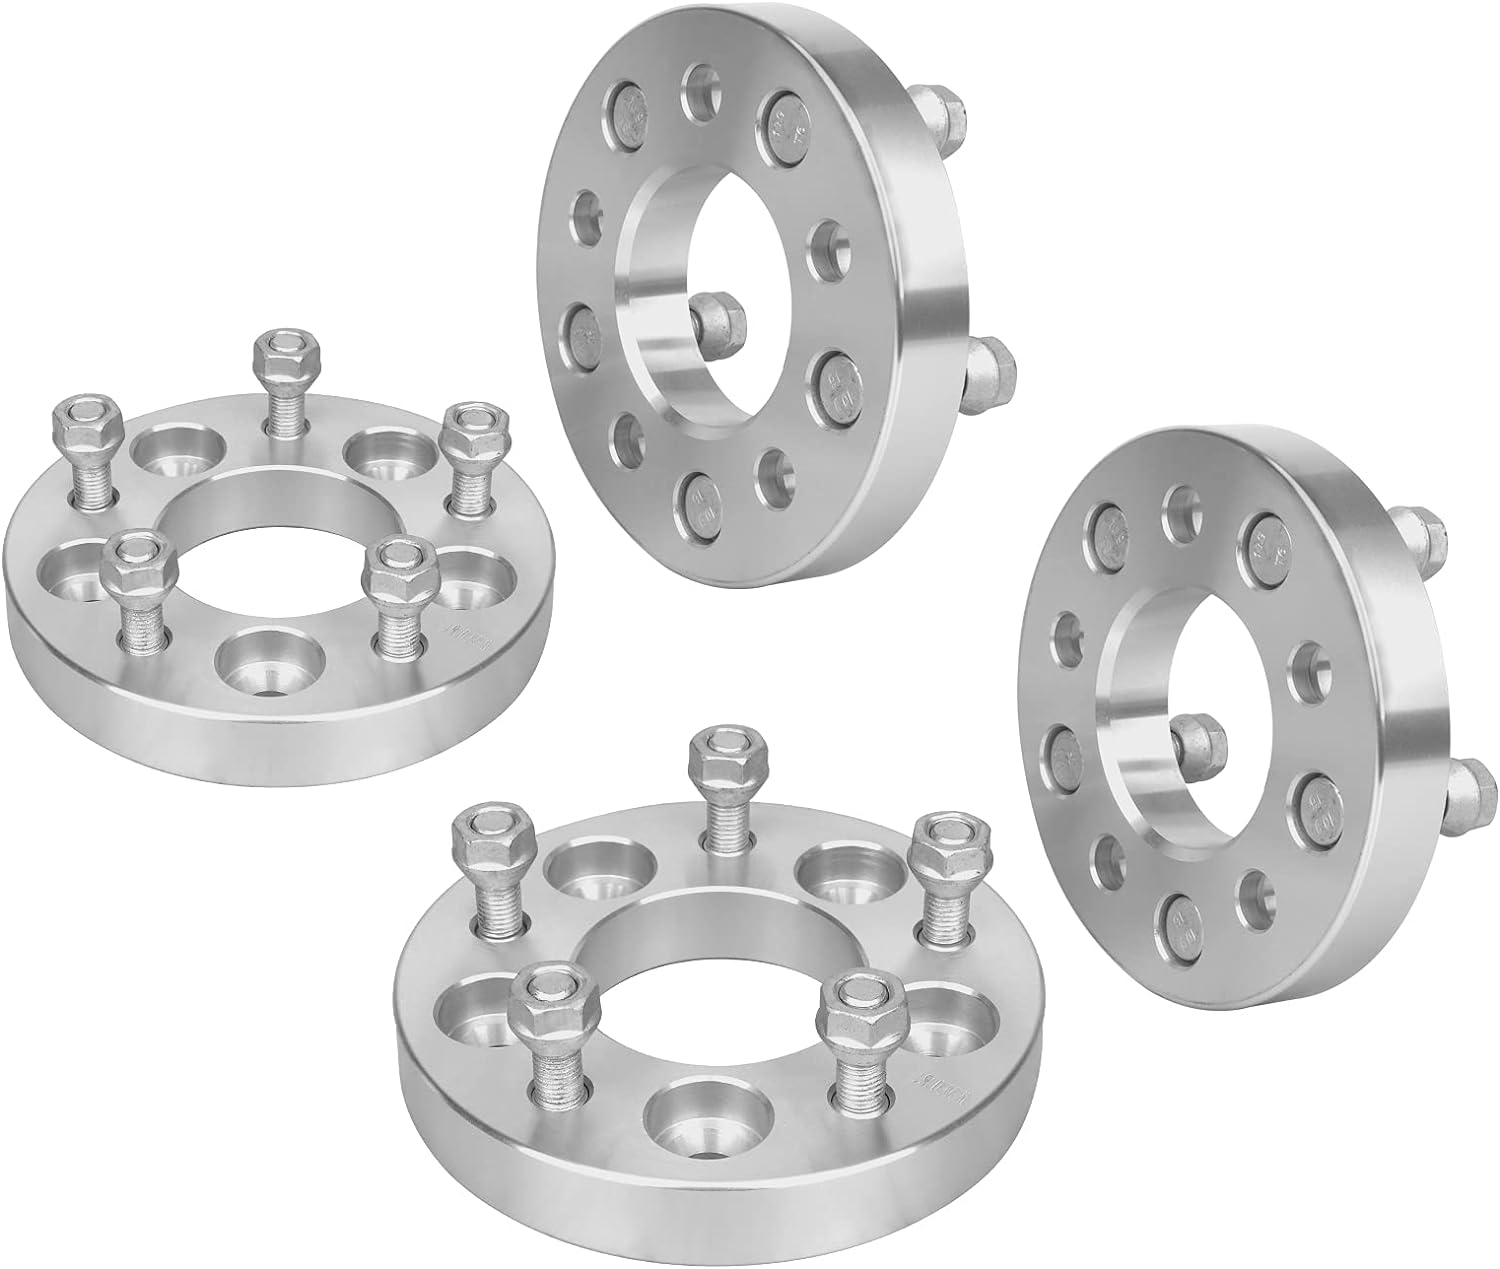 IRONTEK 1" Wheel Adapters & Spacer 5x4.5 to 5x4.75 (74mm Bore, 12x1.5 Studs) Wheel Adapters (Change Your Bolt Pattern) FIT Chevrolet-GMC-Pontiac for 80-04 S10, 85-13 Corvette, 90-05 Jimmy, 82-90 S15